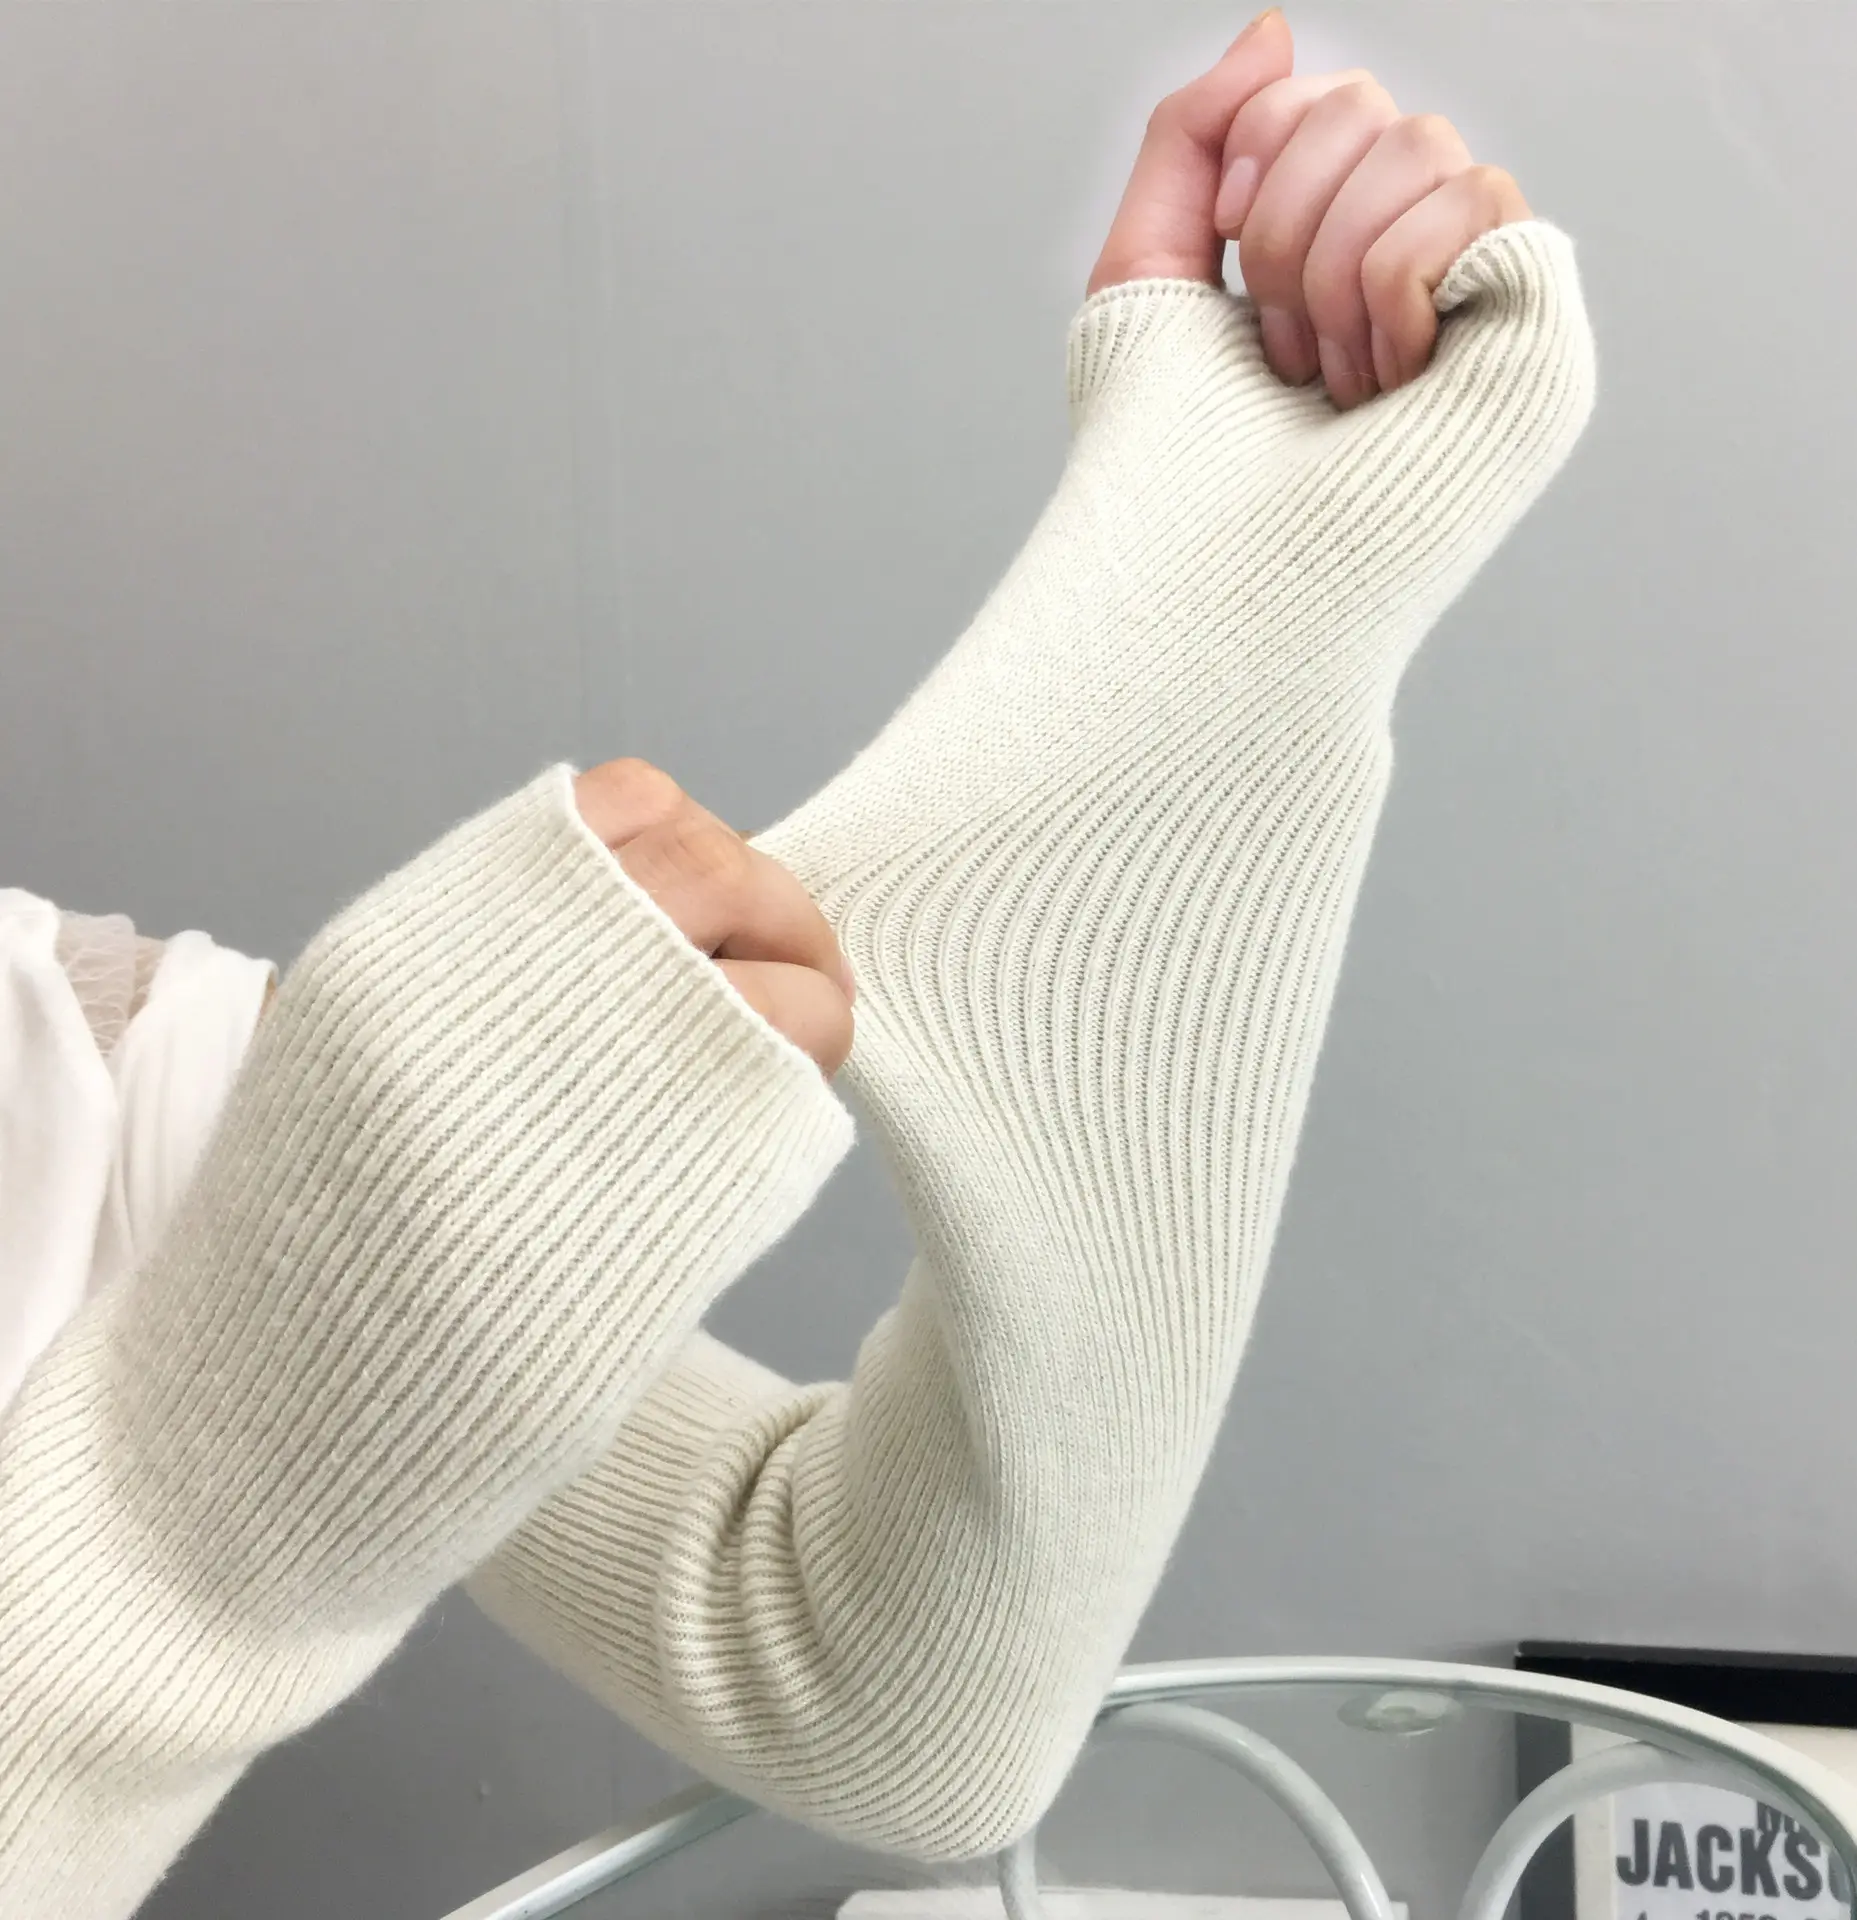 Women Girls Ribbed Knitted Arm Warmers Sleeve Mittens Knitting Long Fingerless Gloves Knit Wrist Warmers with Thumb Hole